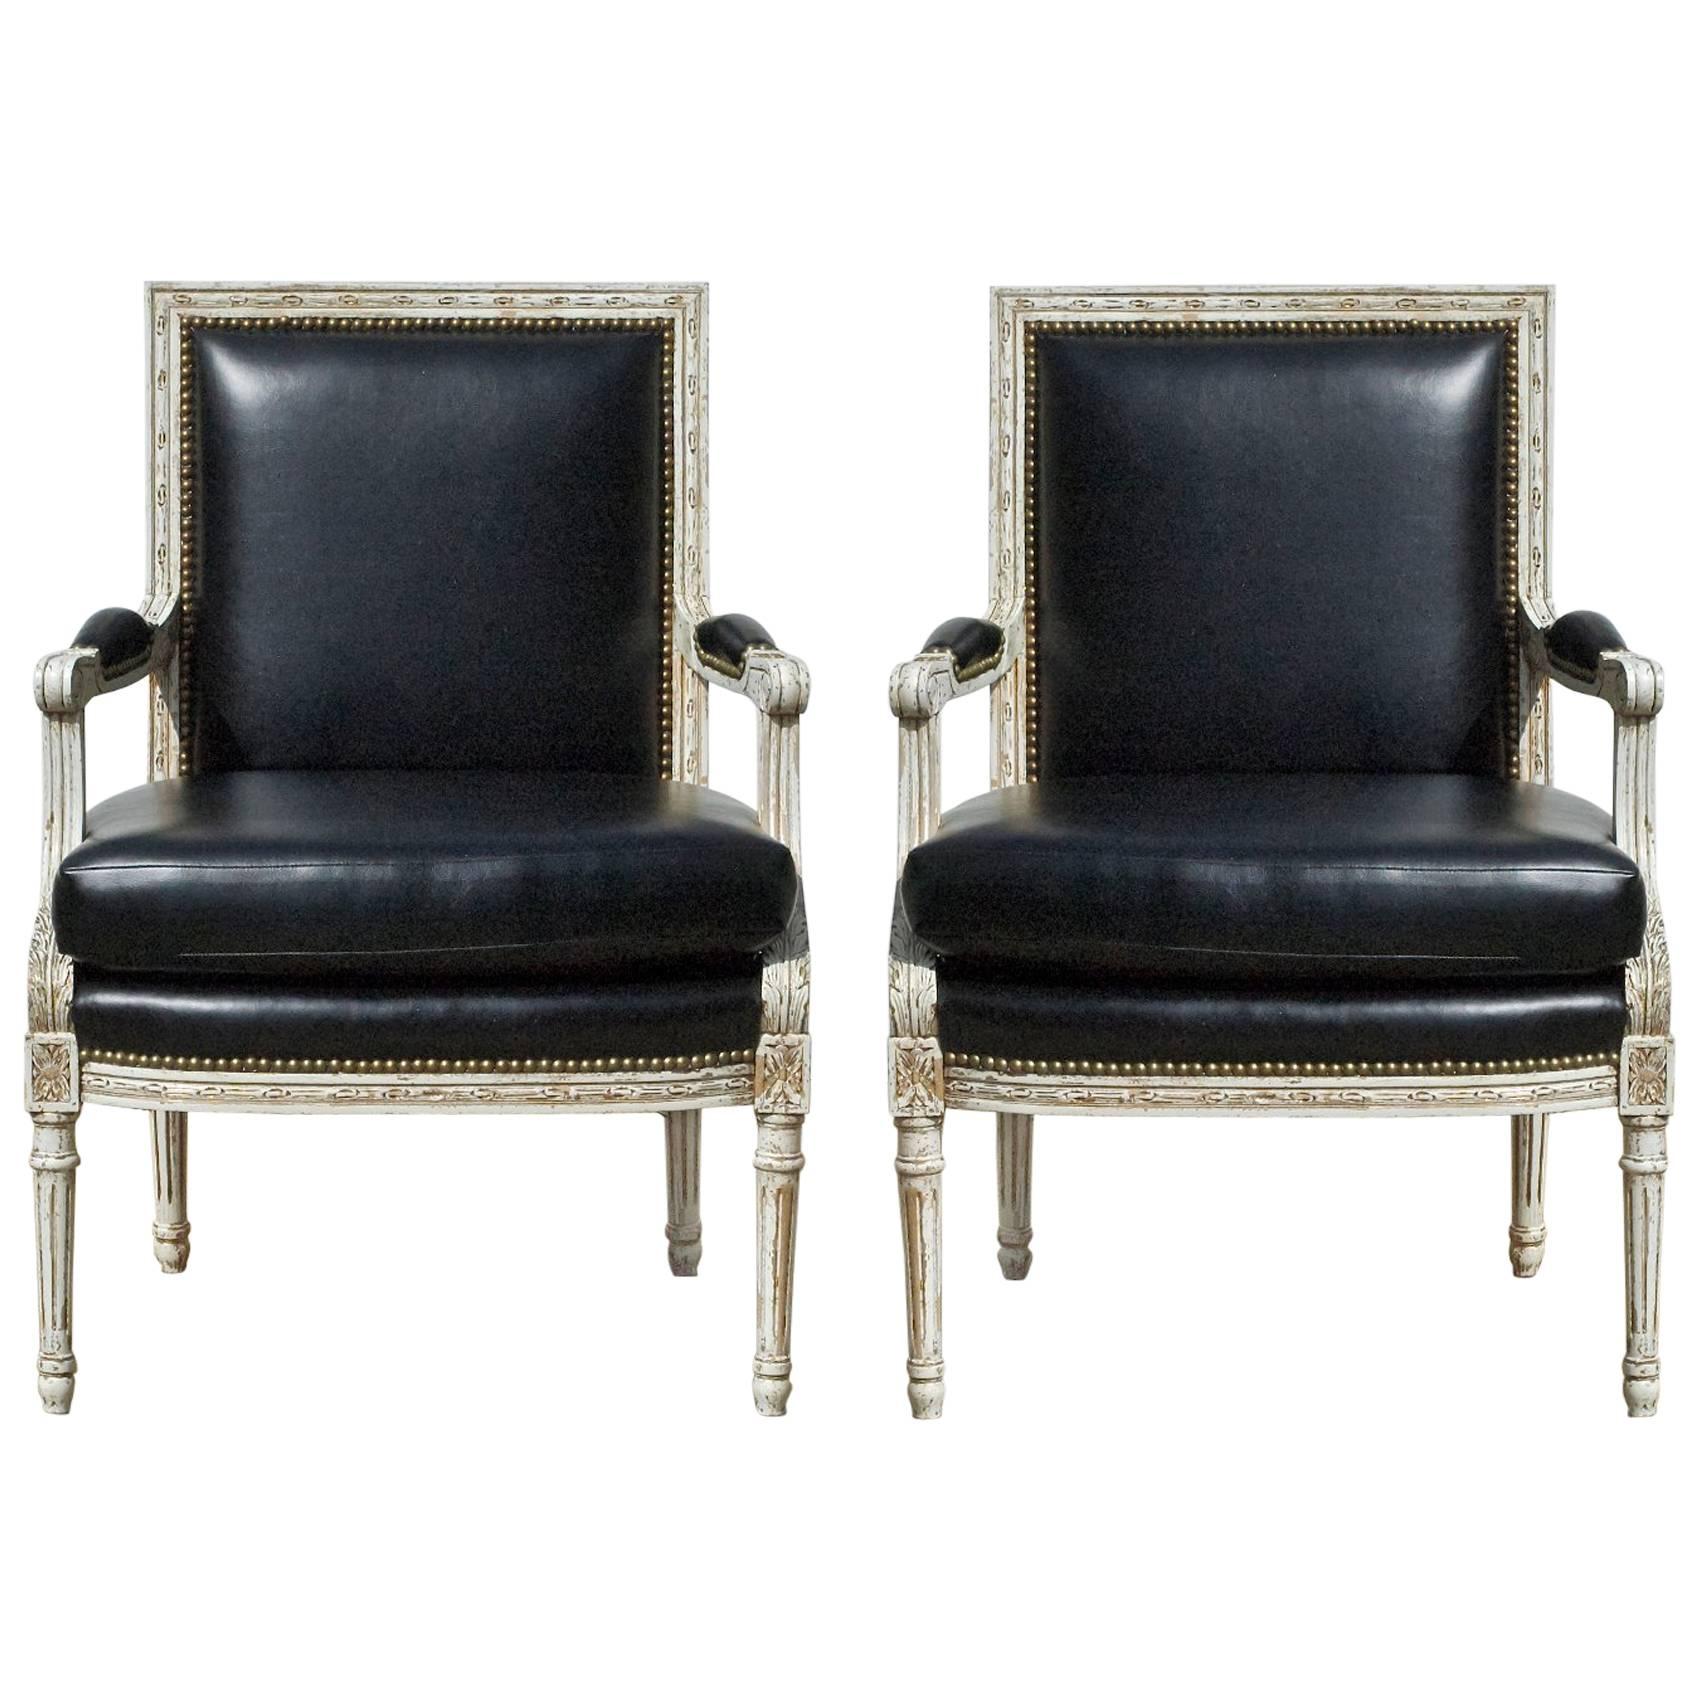 Vintage Louis XVI Style Armchairs in Black and White